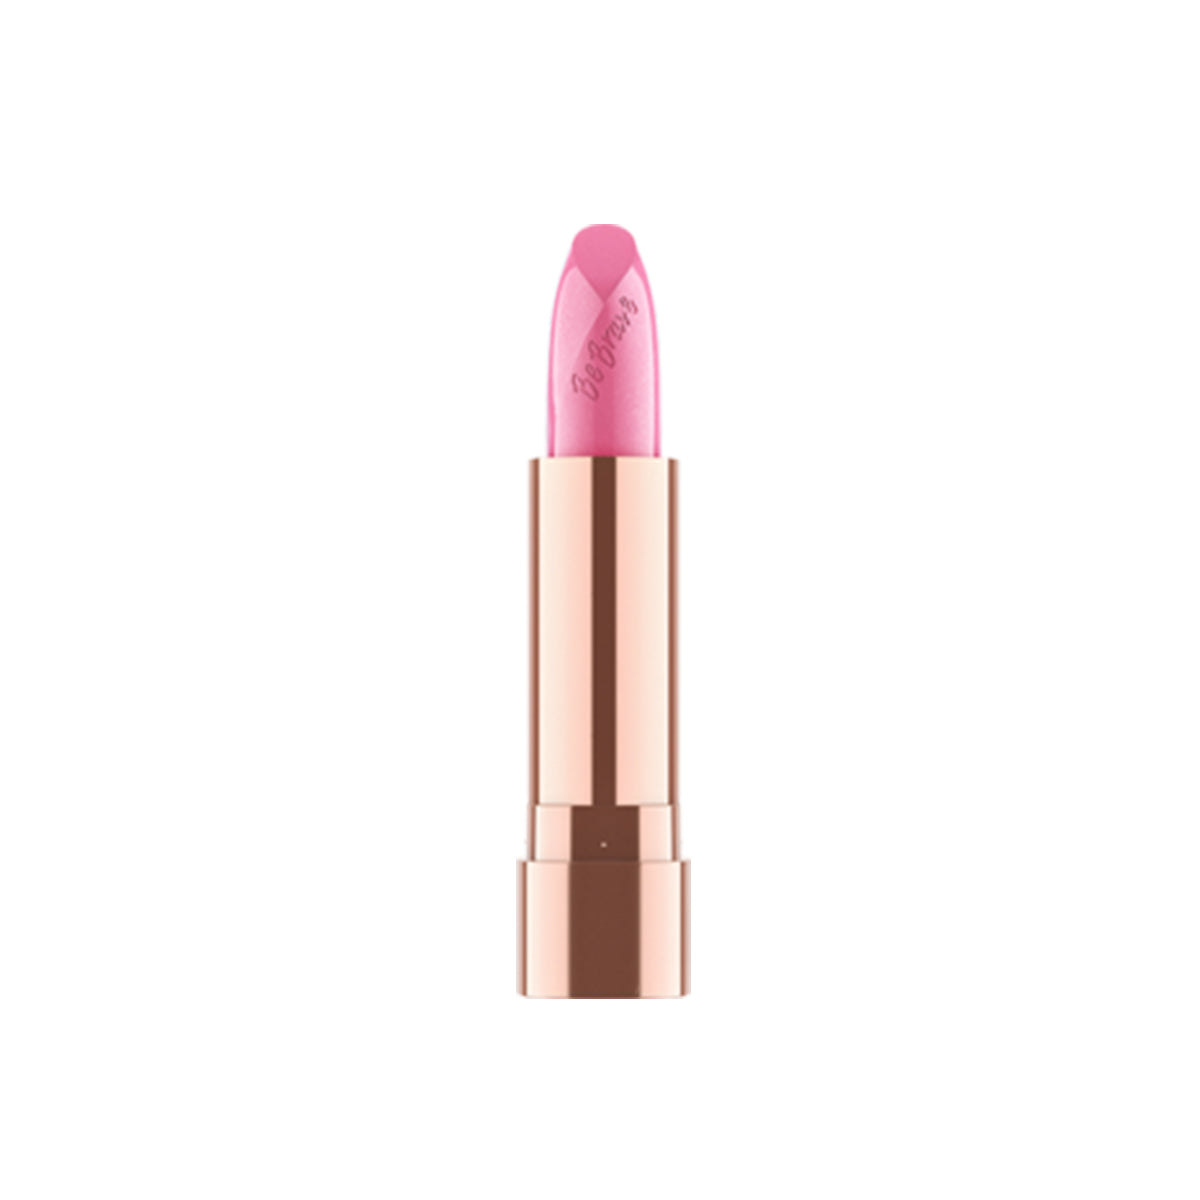 POWER PLUMPING GEL LIPSTICK 050 STRONG IS THE NEW PRETTY - CATRICE